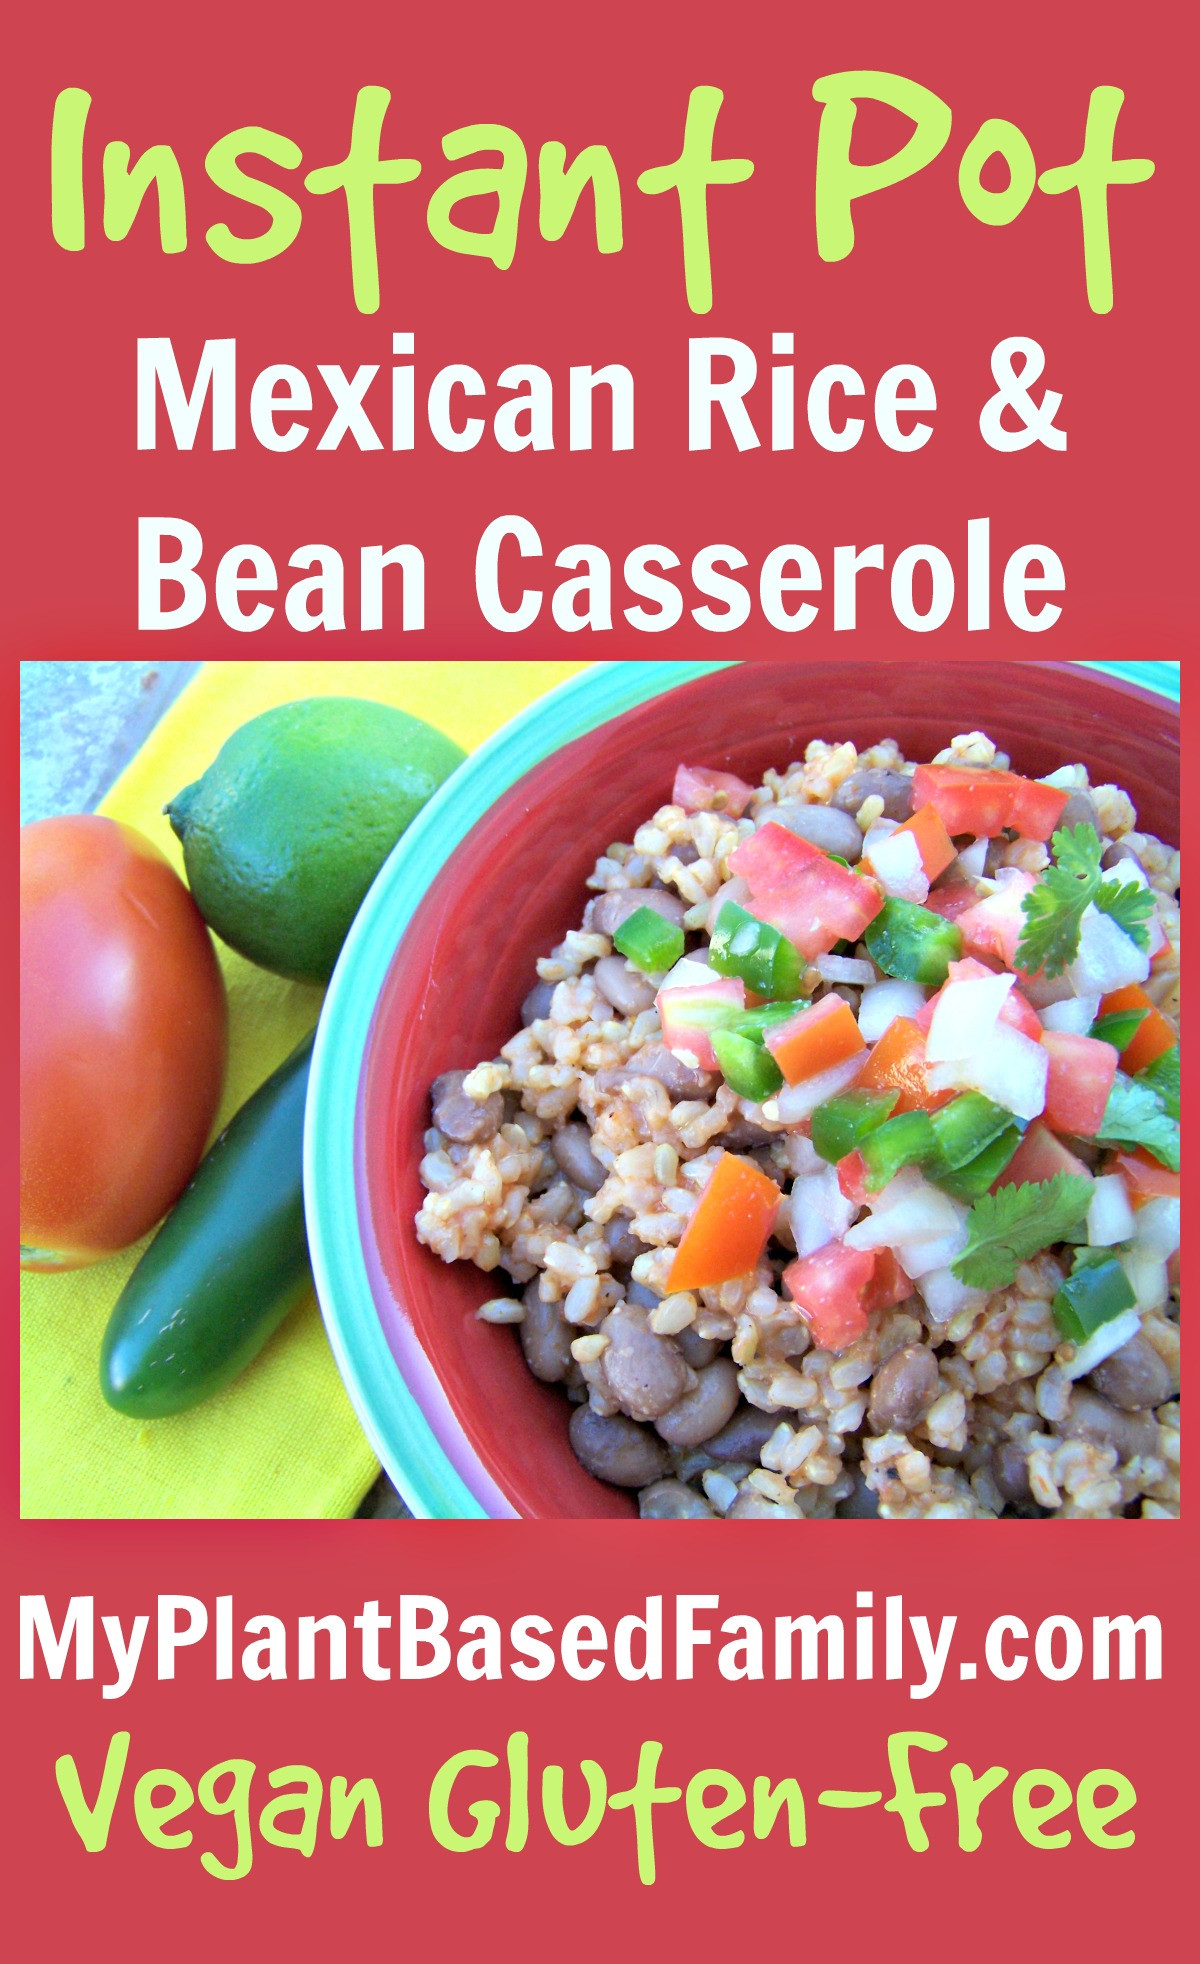 Instapot Plant Based Recipes
 Instant Pot Mexican Casserole My Plant Based Family